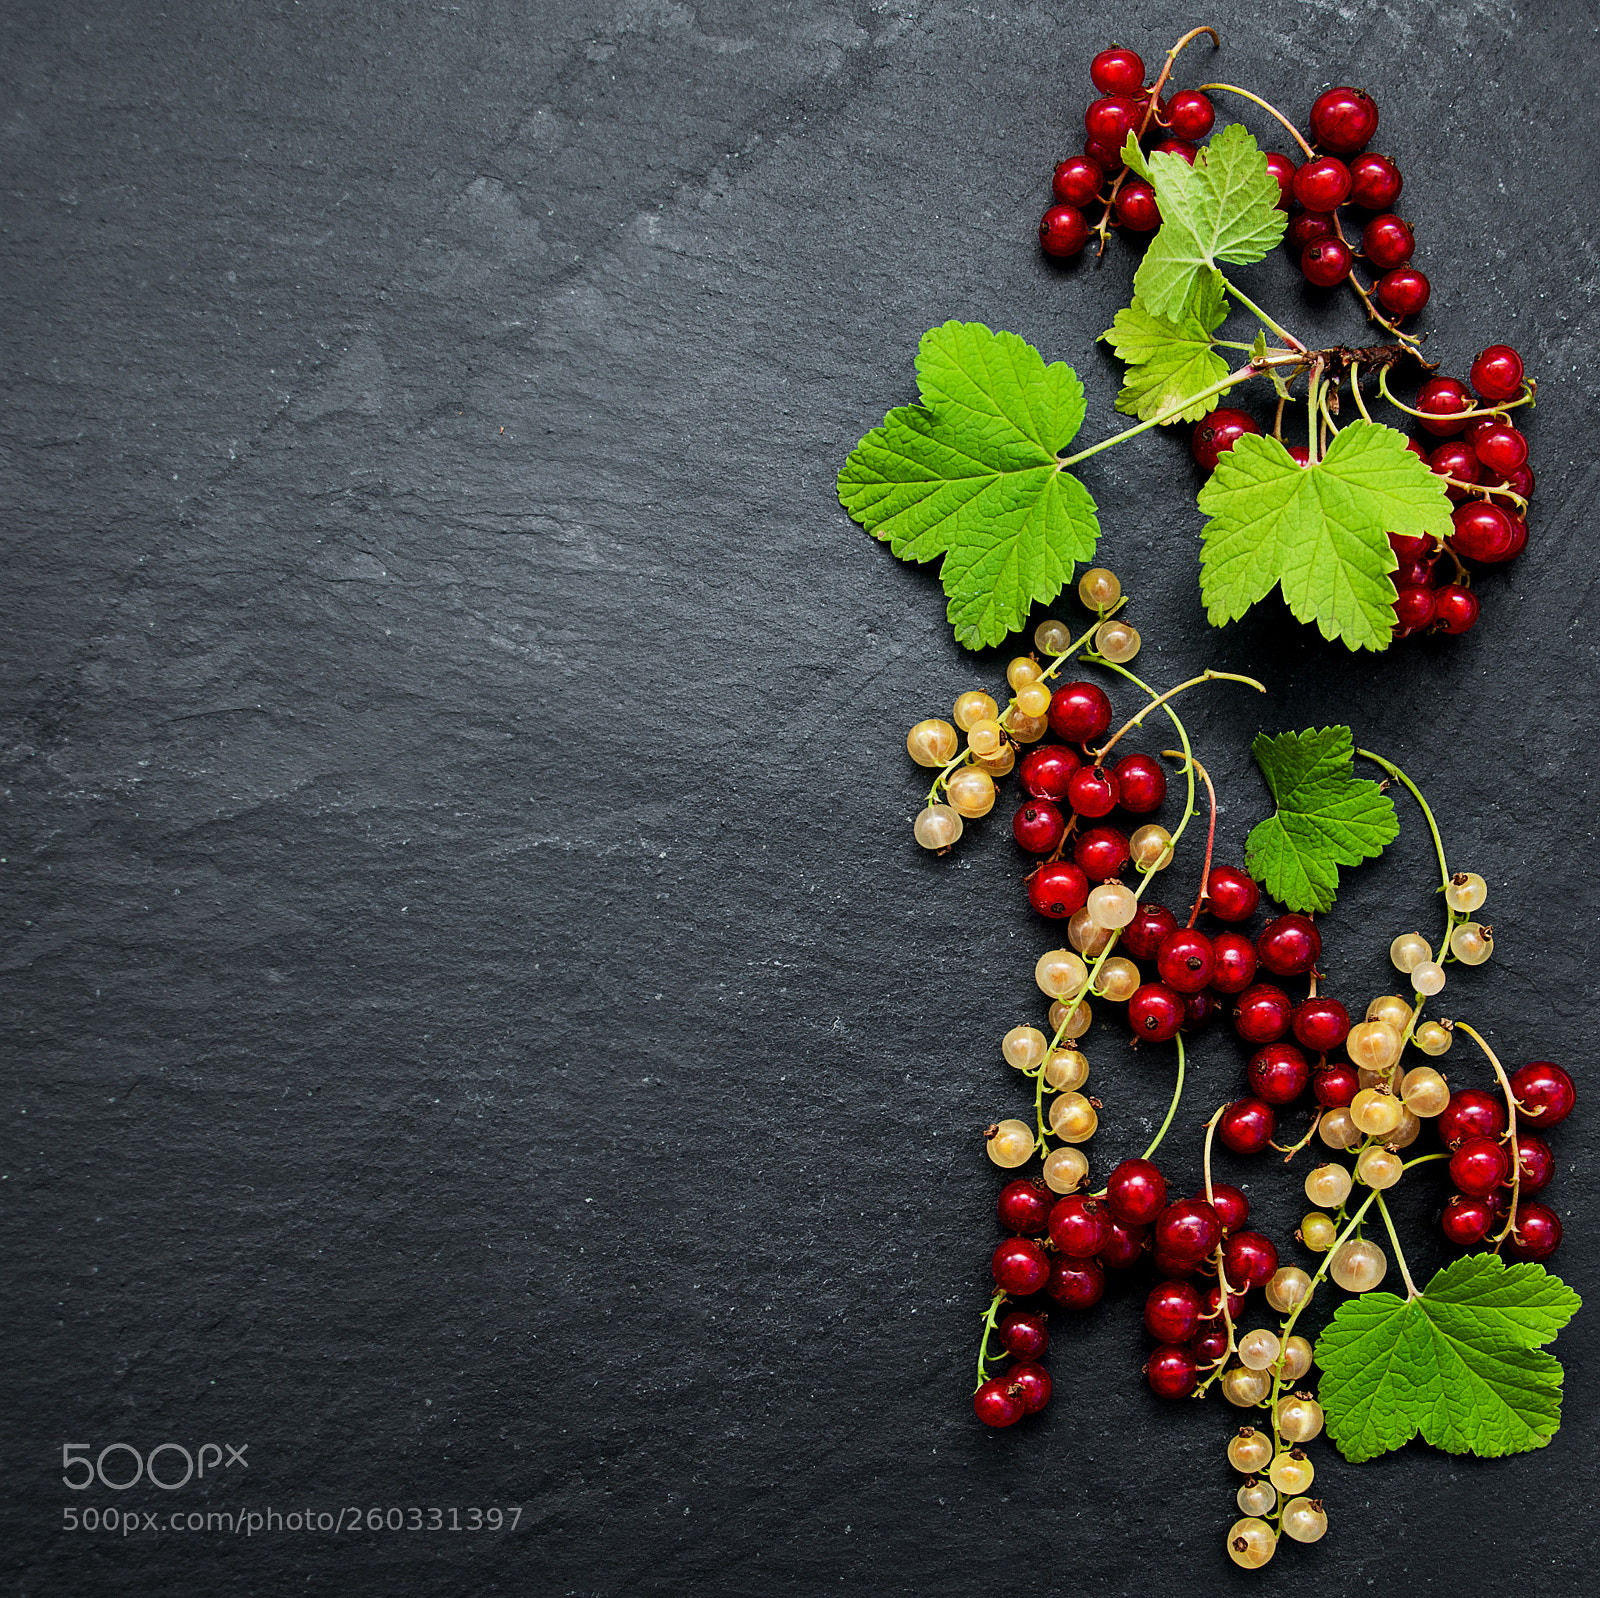 Nikon D90 sample photo. Red currant with leaves photography